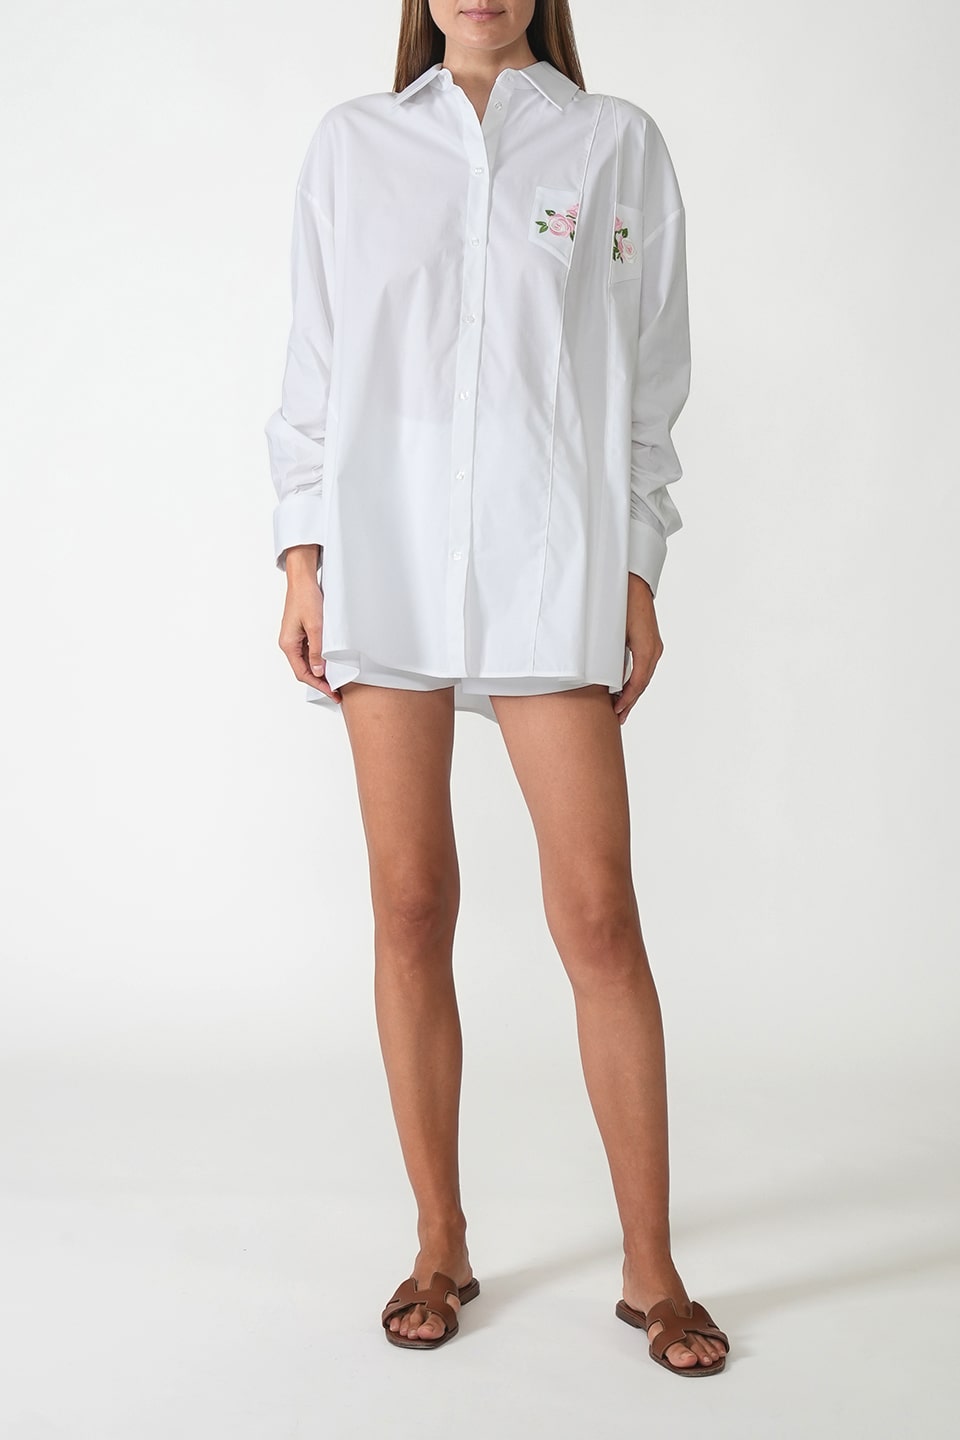 Thumbnail for Product gallery 1, White Long Shirt